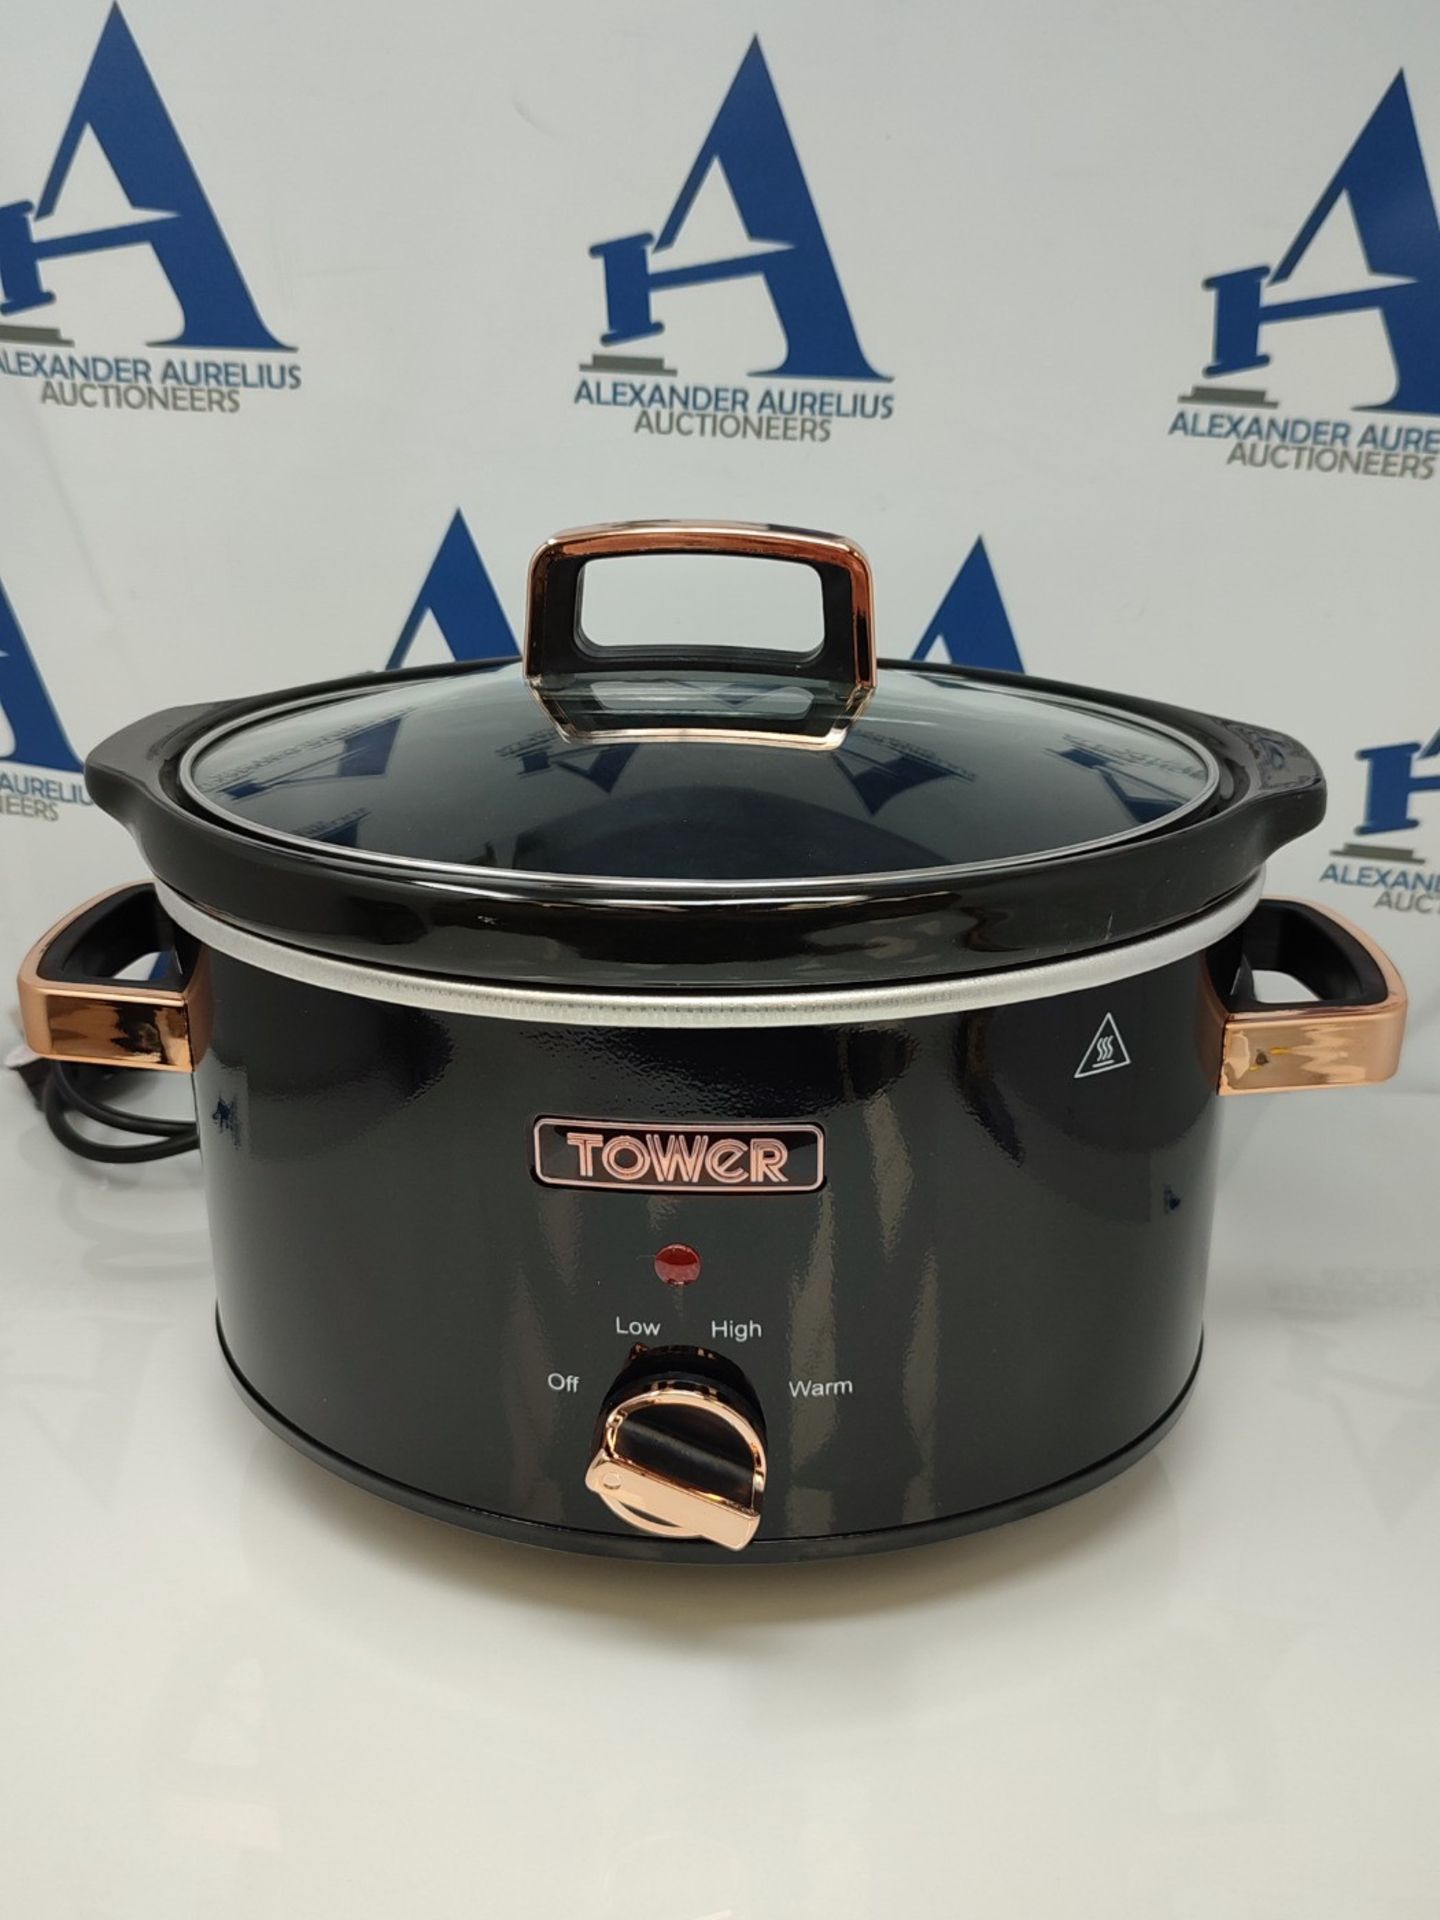 Tower T16018RG 3.5 Litre Stainless Steel Slow Cooker with 3 Heat Settings and Keep War - Image 3 of 3